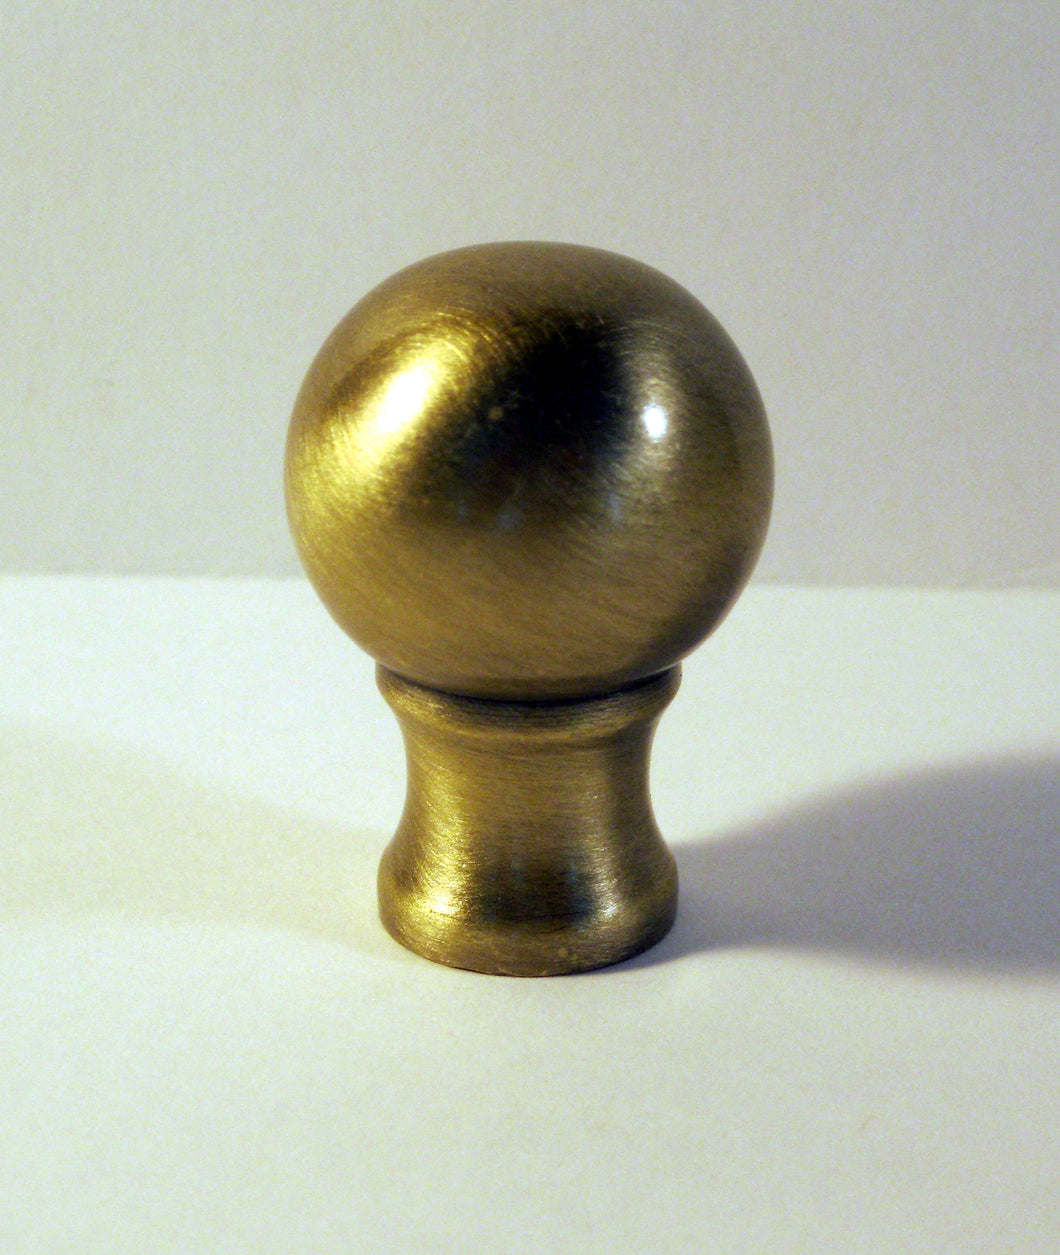 BALL Machined Metal Lamp Finial-Antique Brass Finish